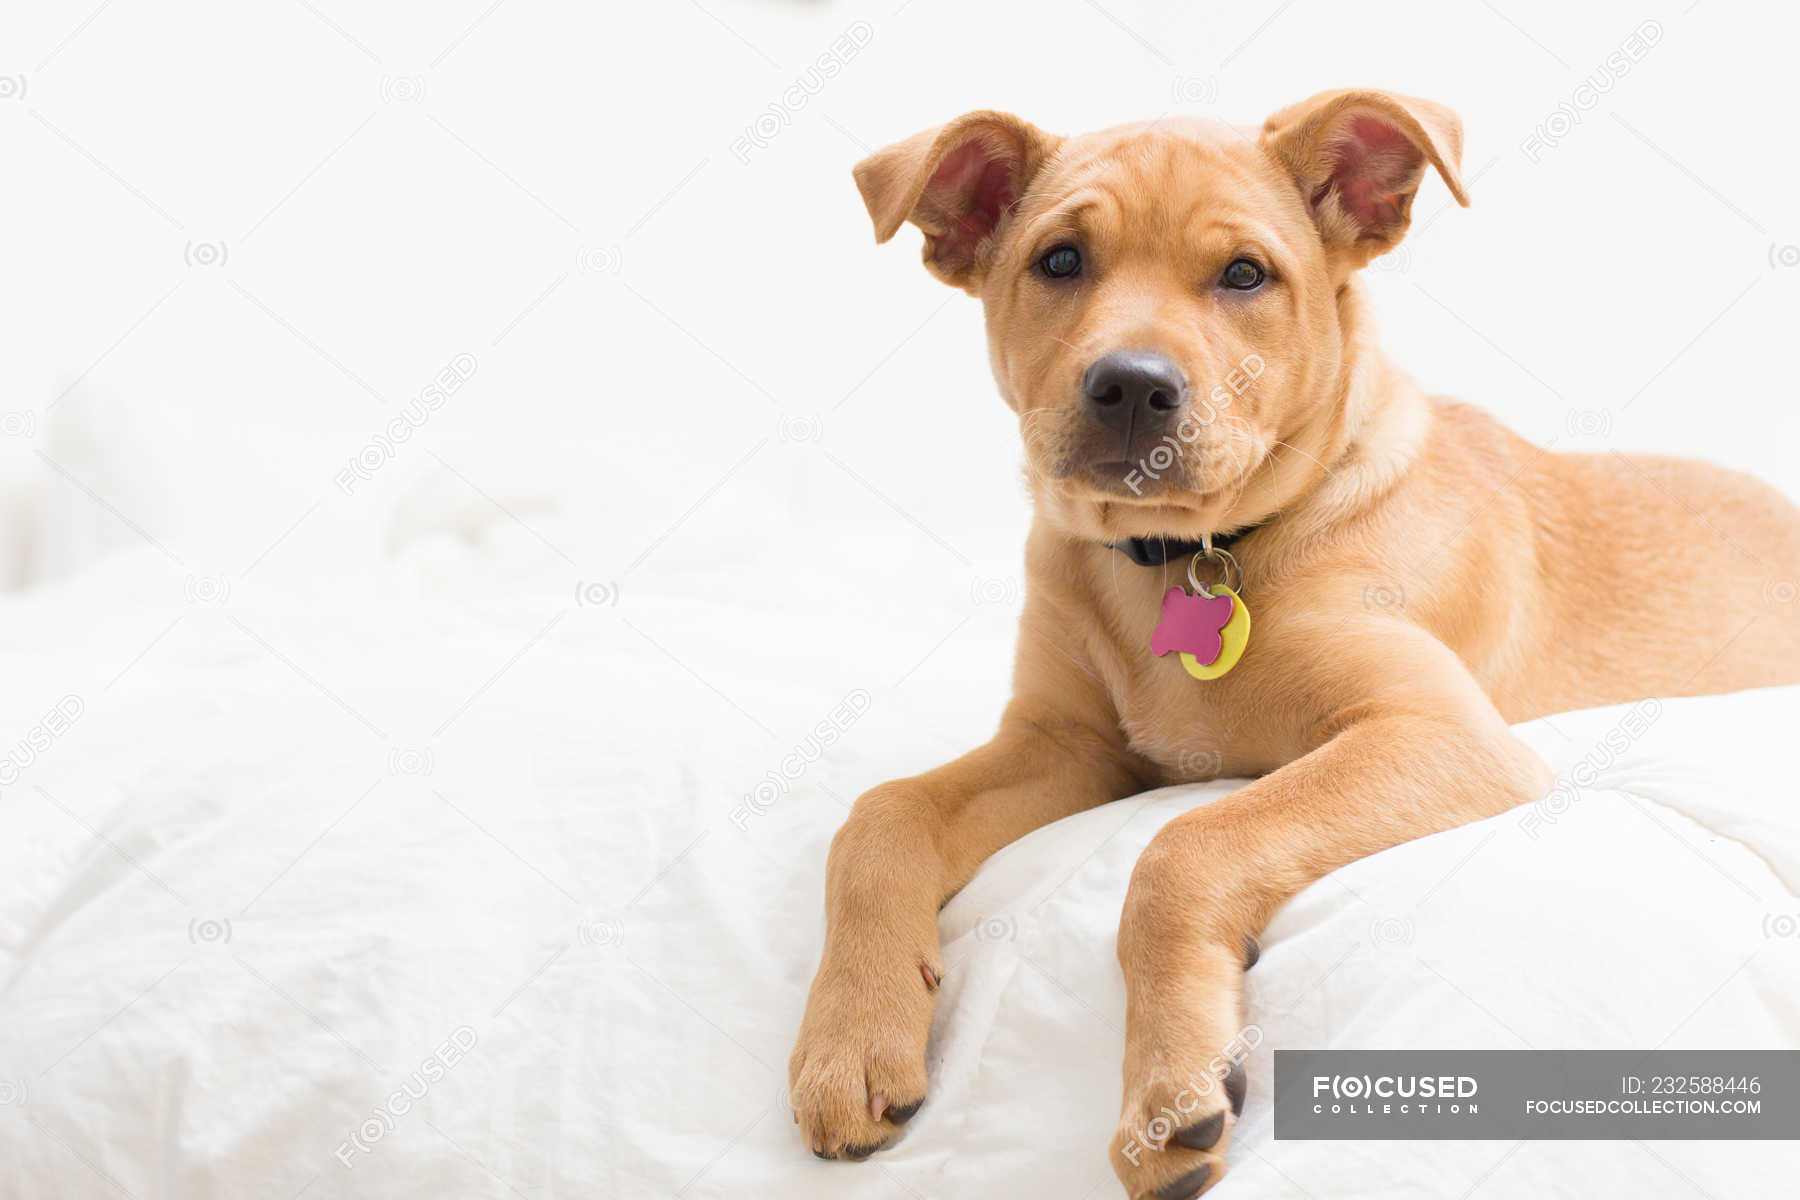 Labrador terrier mix Puppy dog lying on bed — pet, funny Stock Photo | #232588446